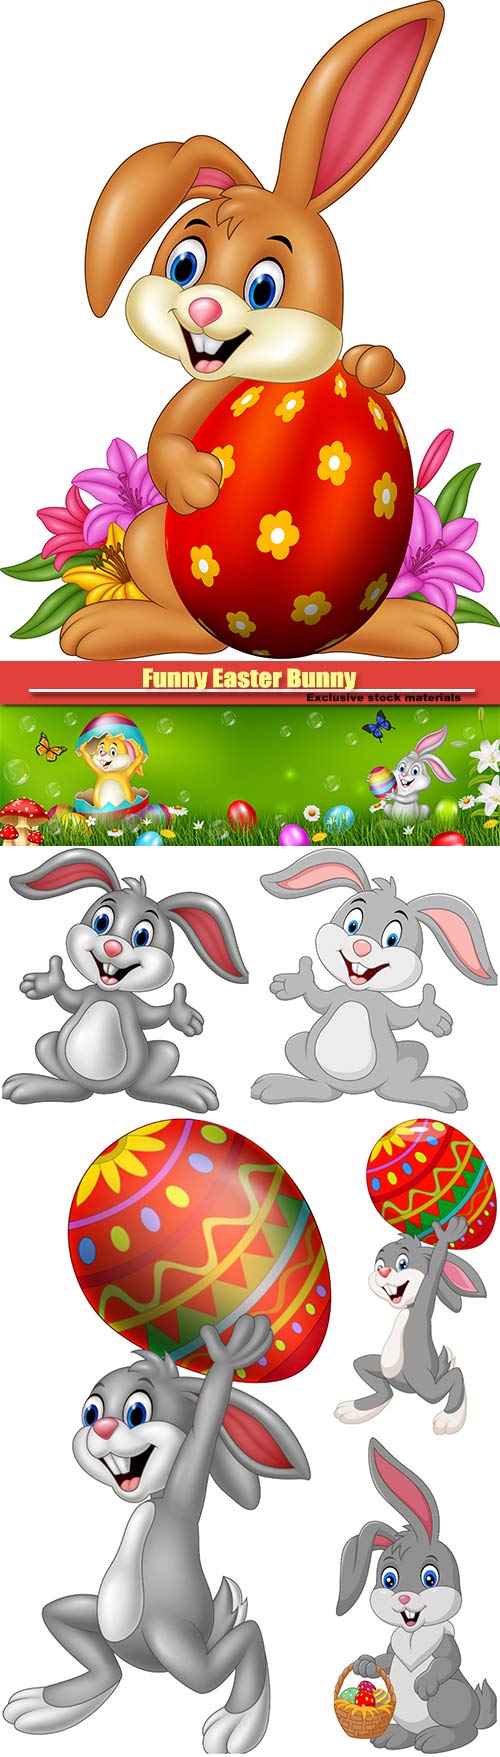 Funny vector Easter Bunny